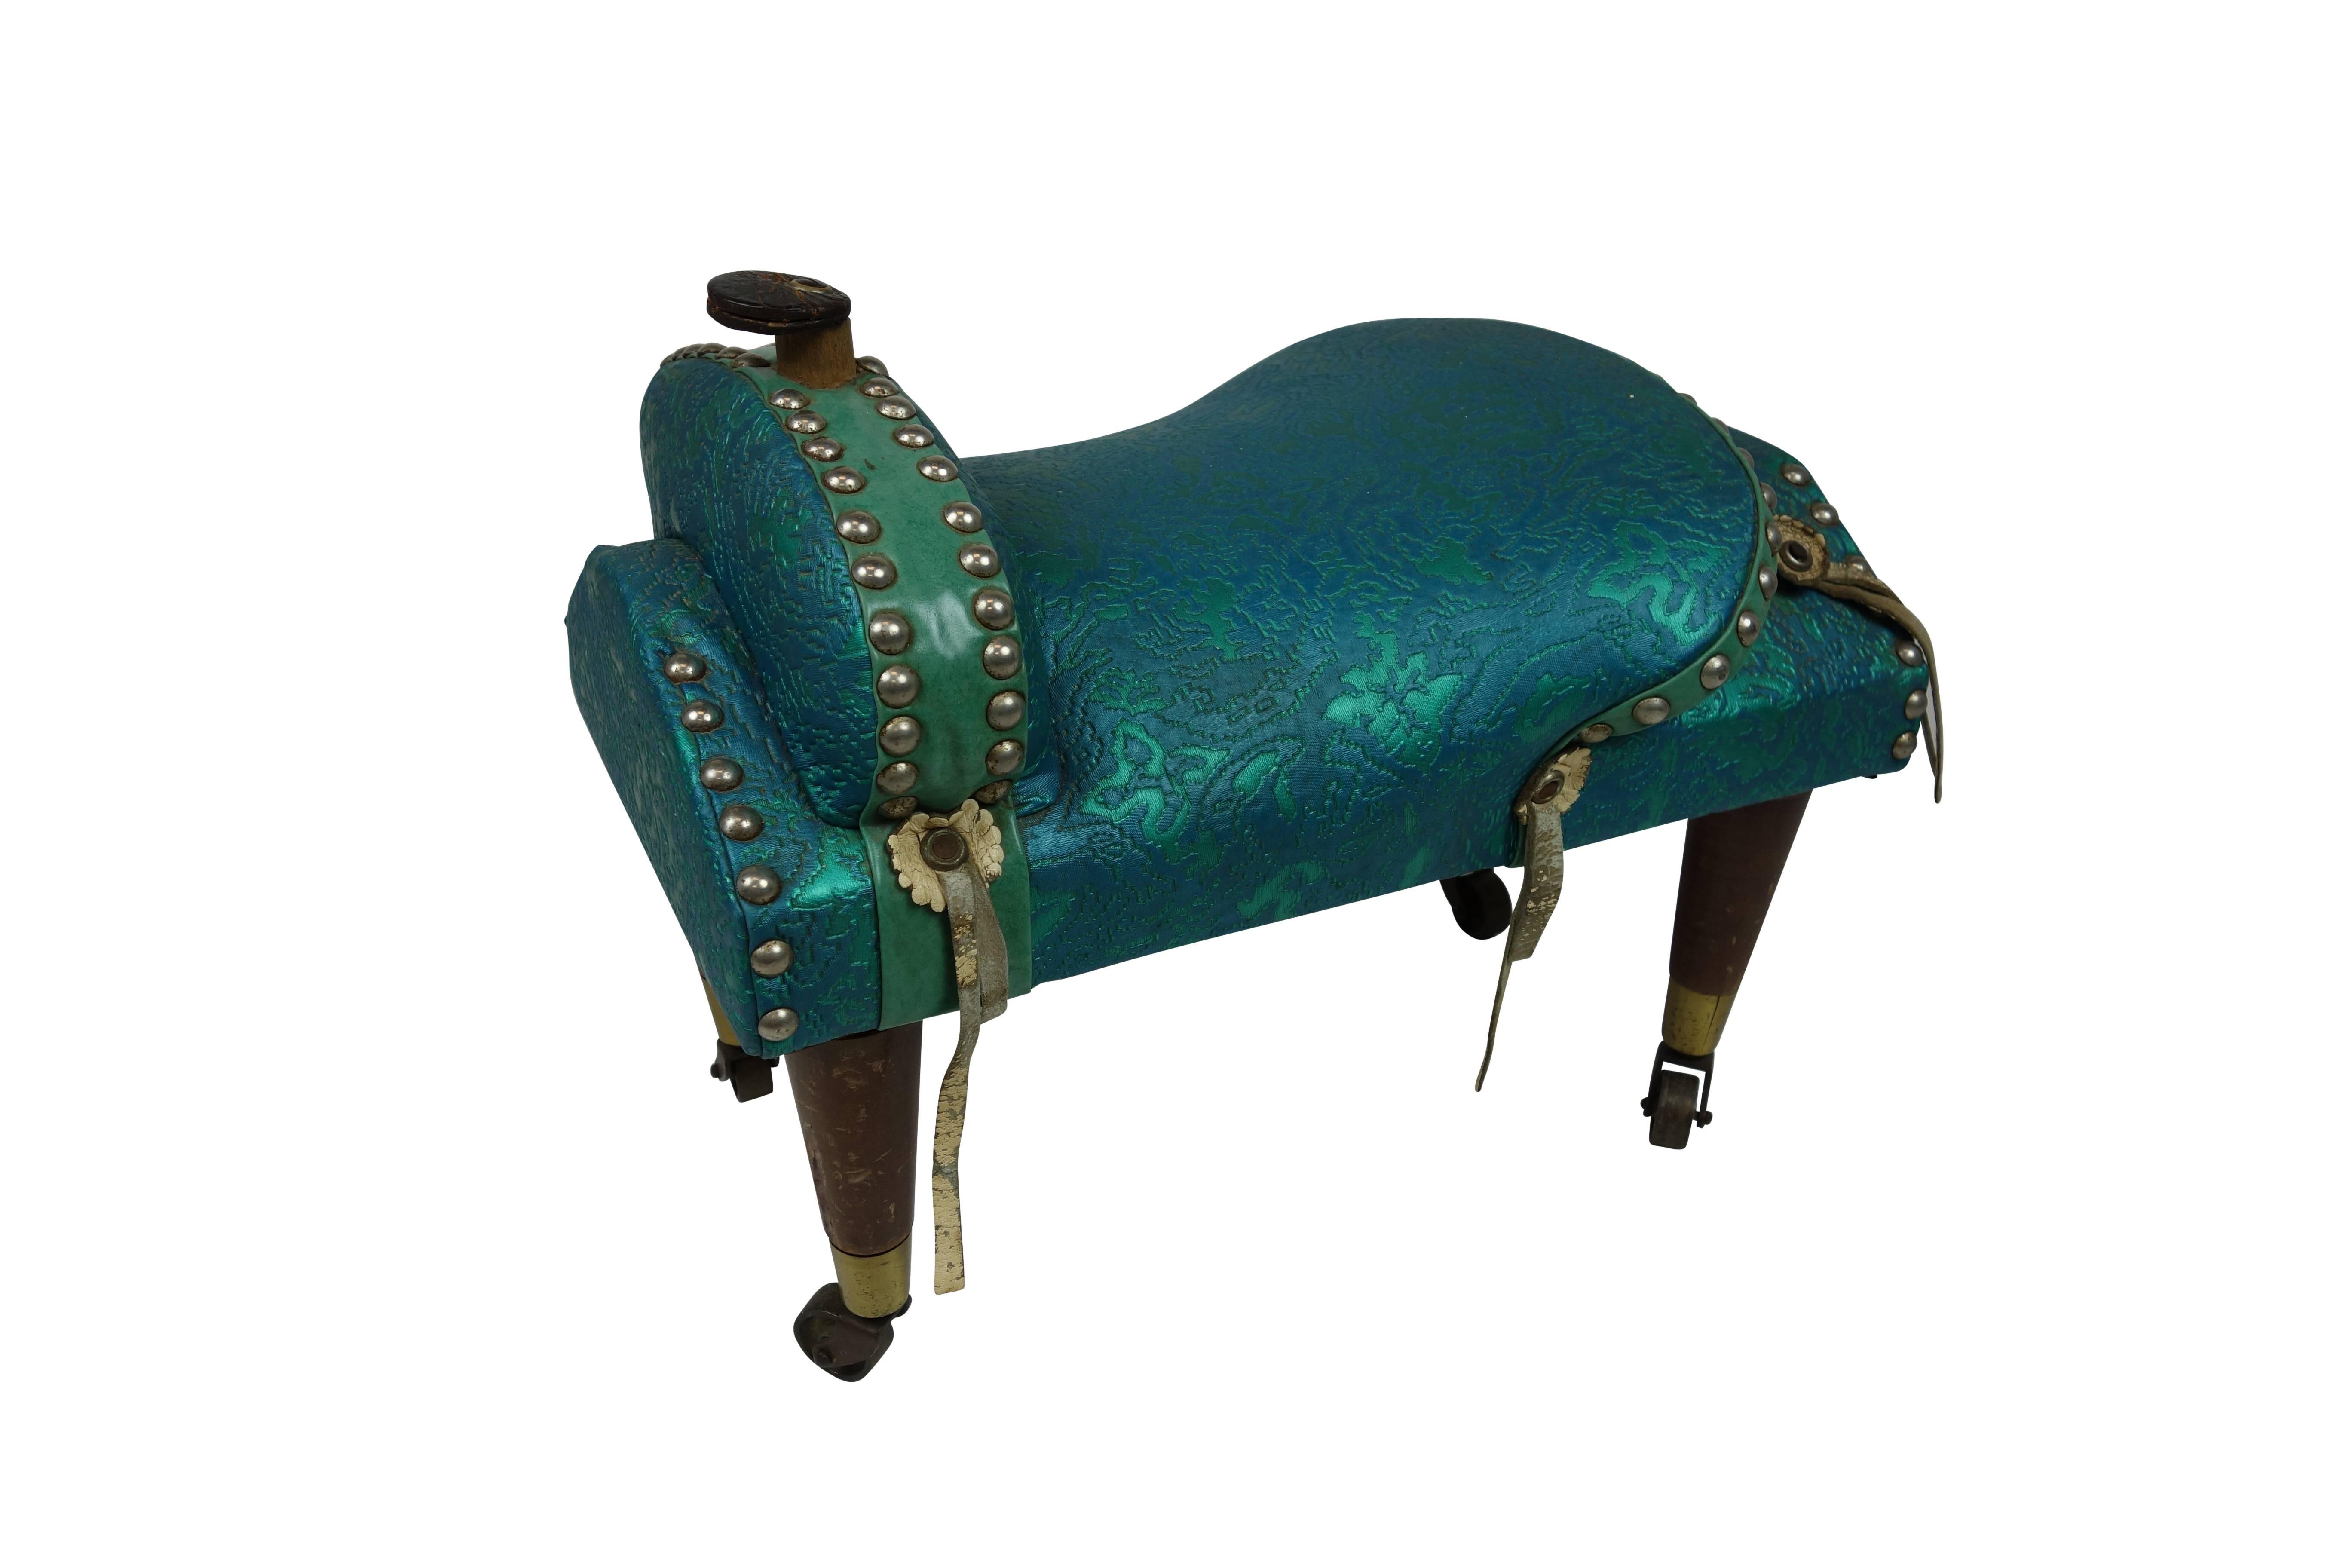 This is a unique teal upholstered and riveted saddle foot stool on casters.